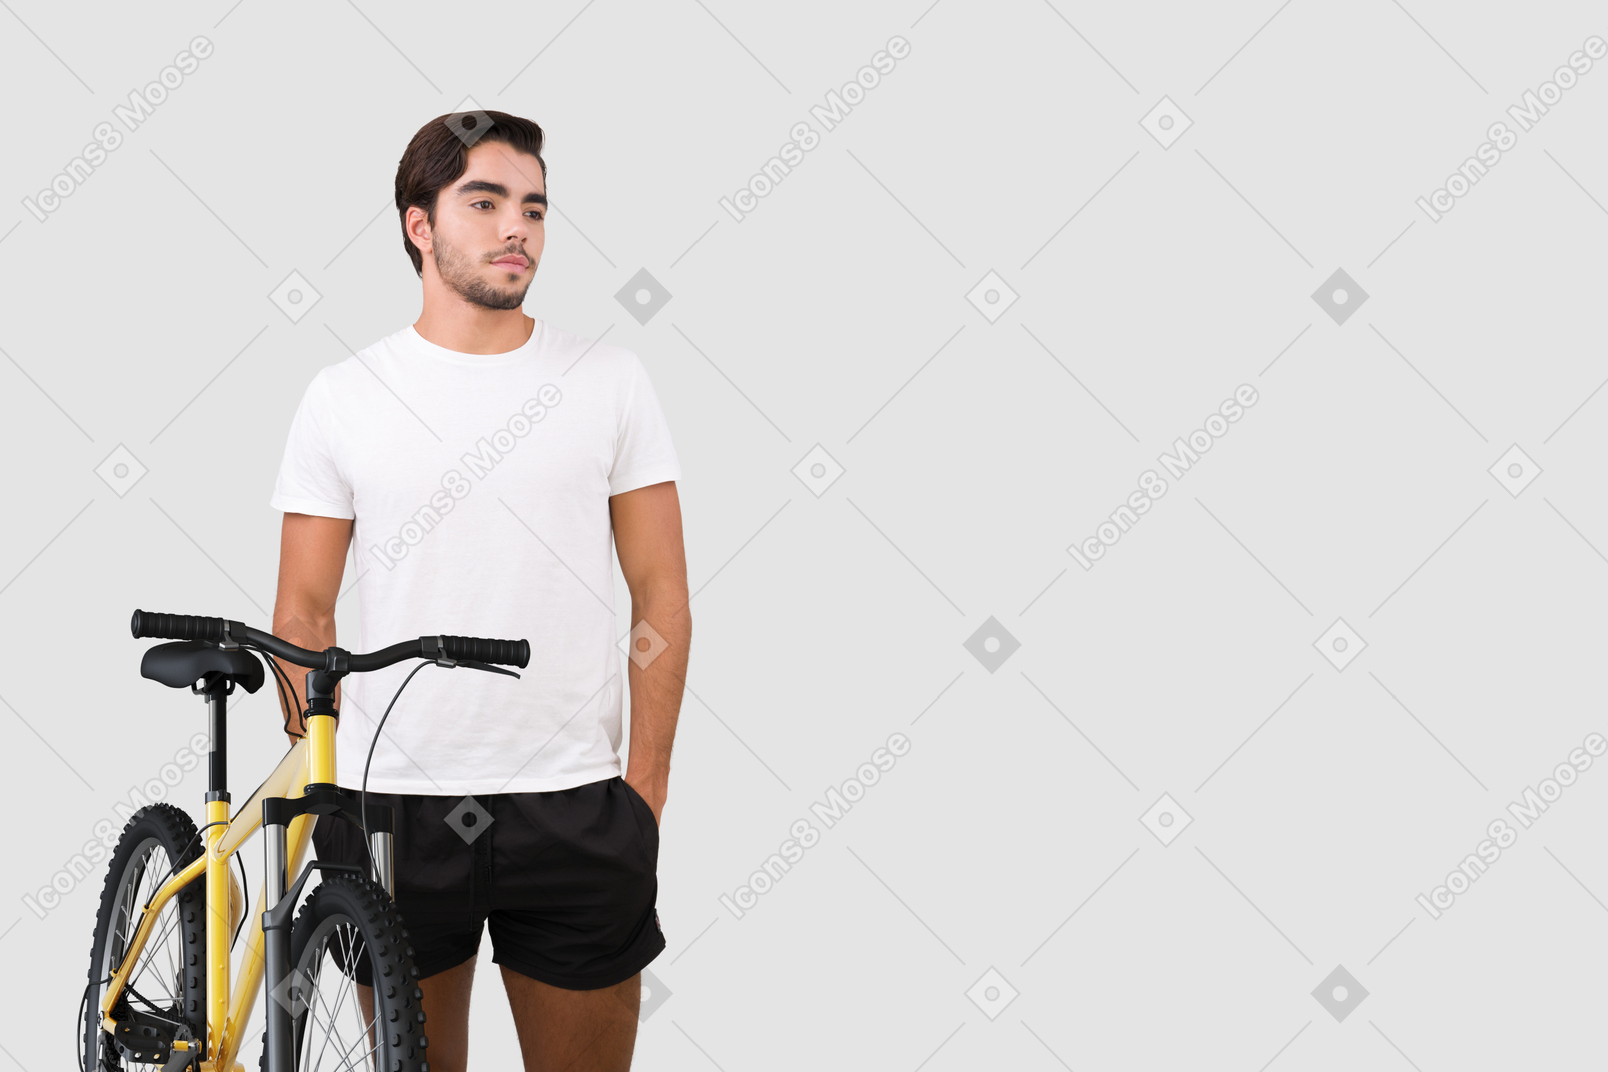 A man with a bicycle